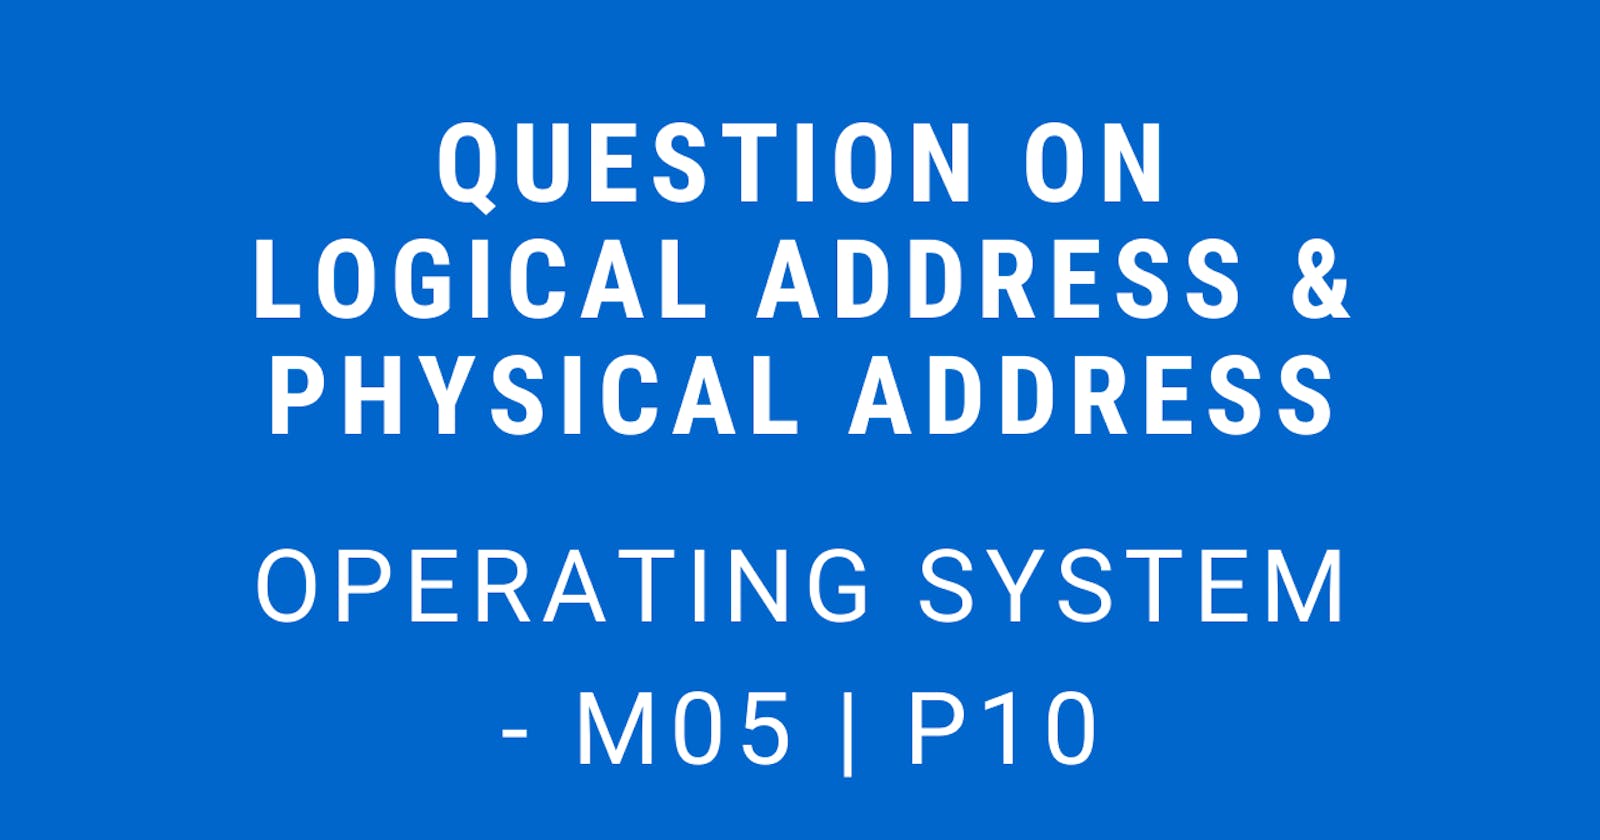 Question on Logical Address & Physical Address | Operating System - M05 P10